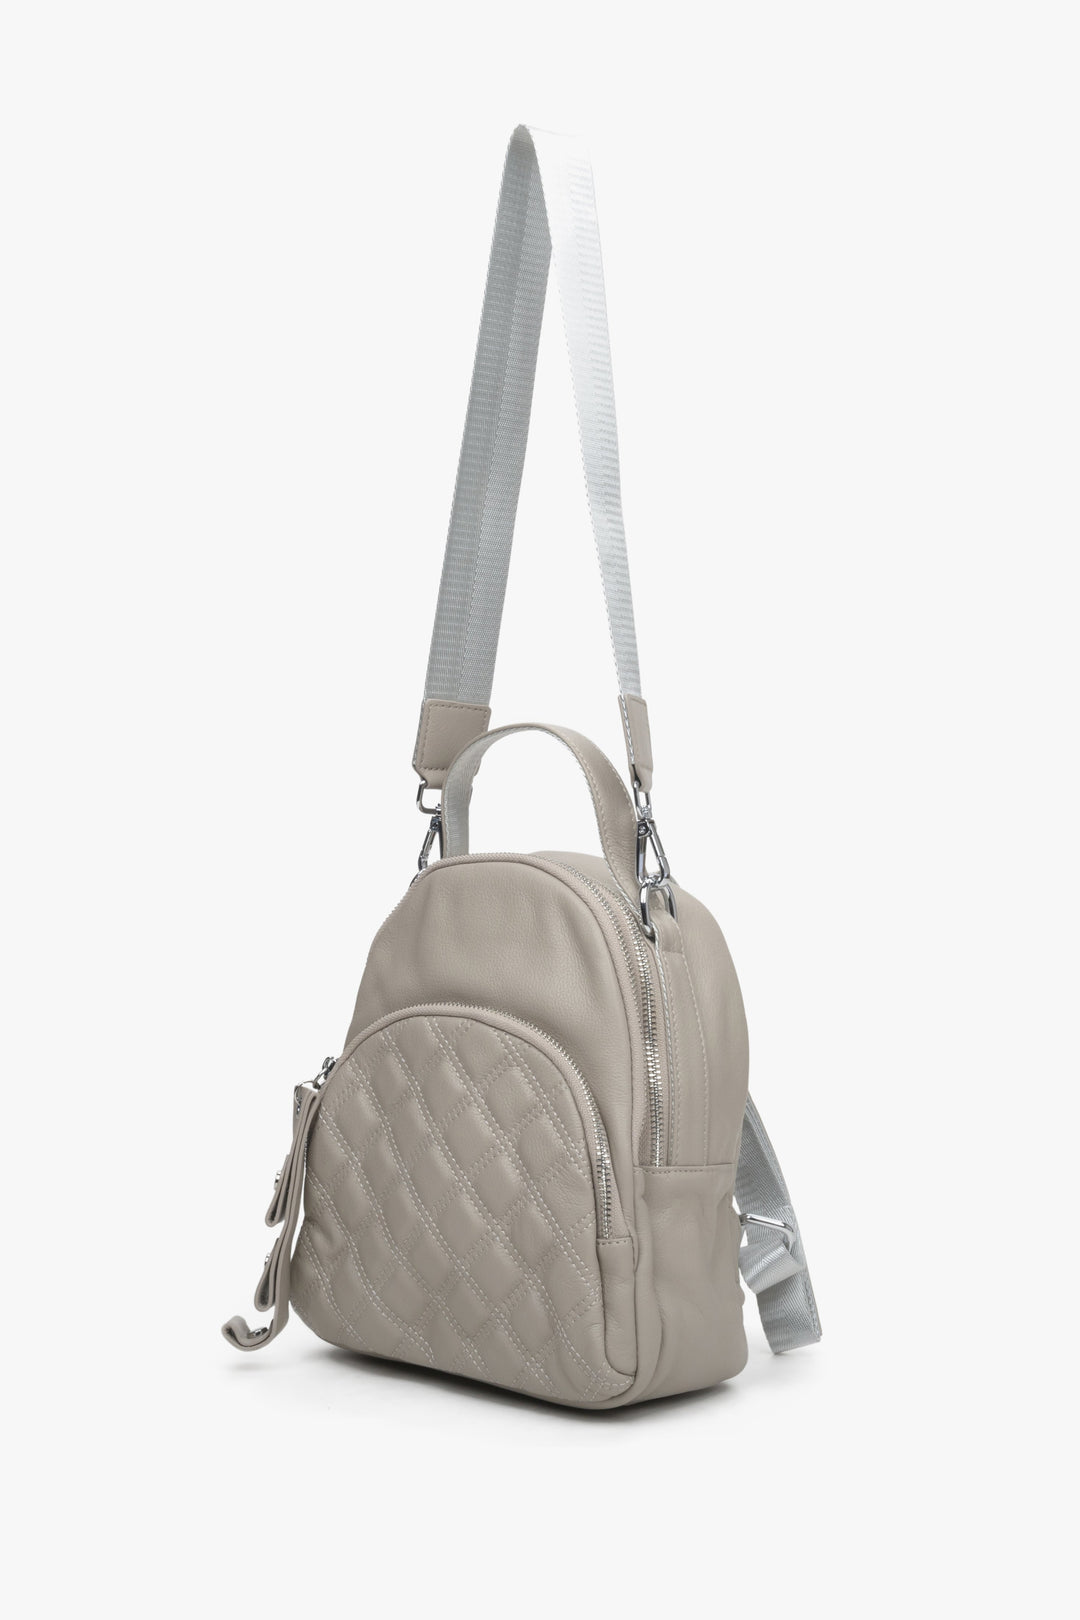 Estro's women's beige leather backpack - presentation of the model with the long strap extended.